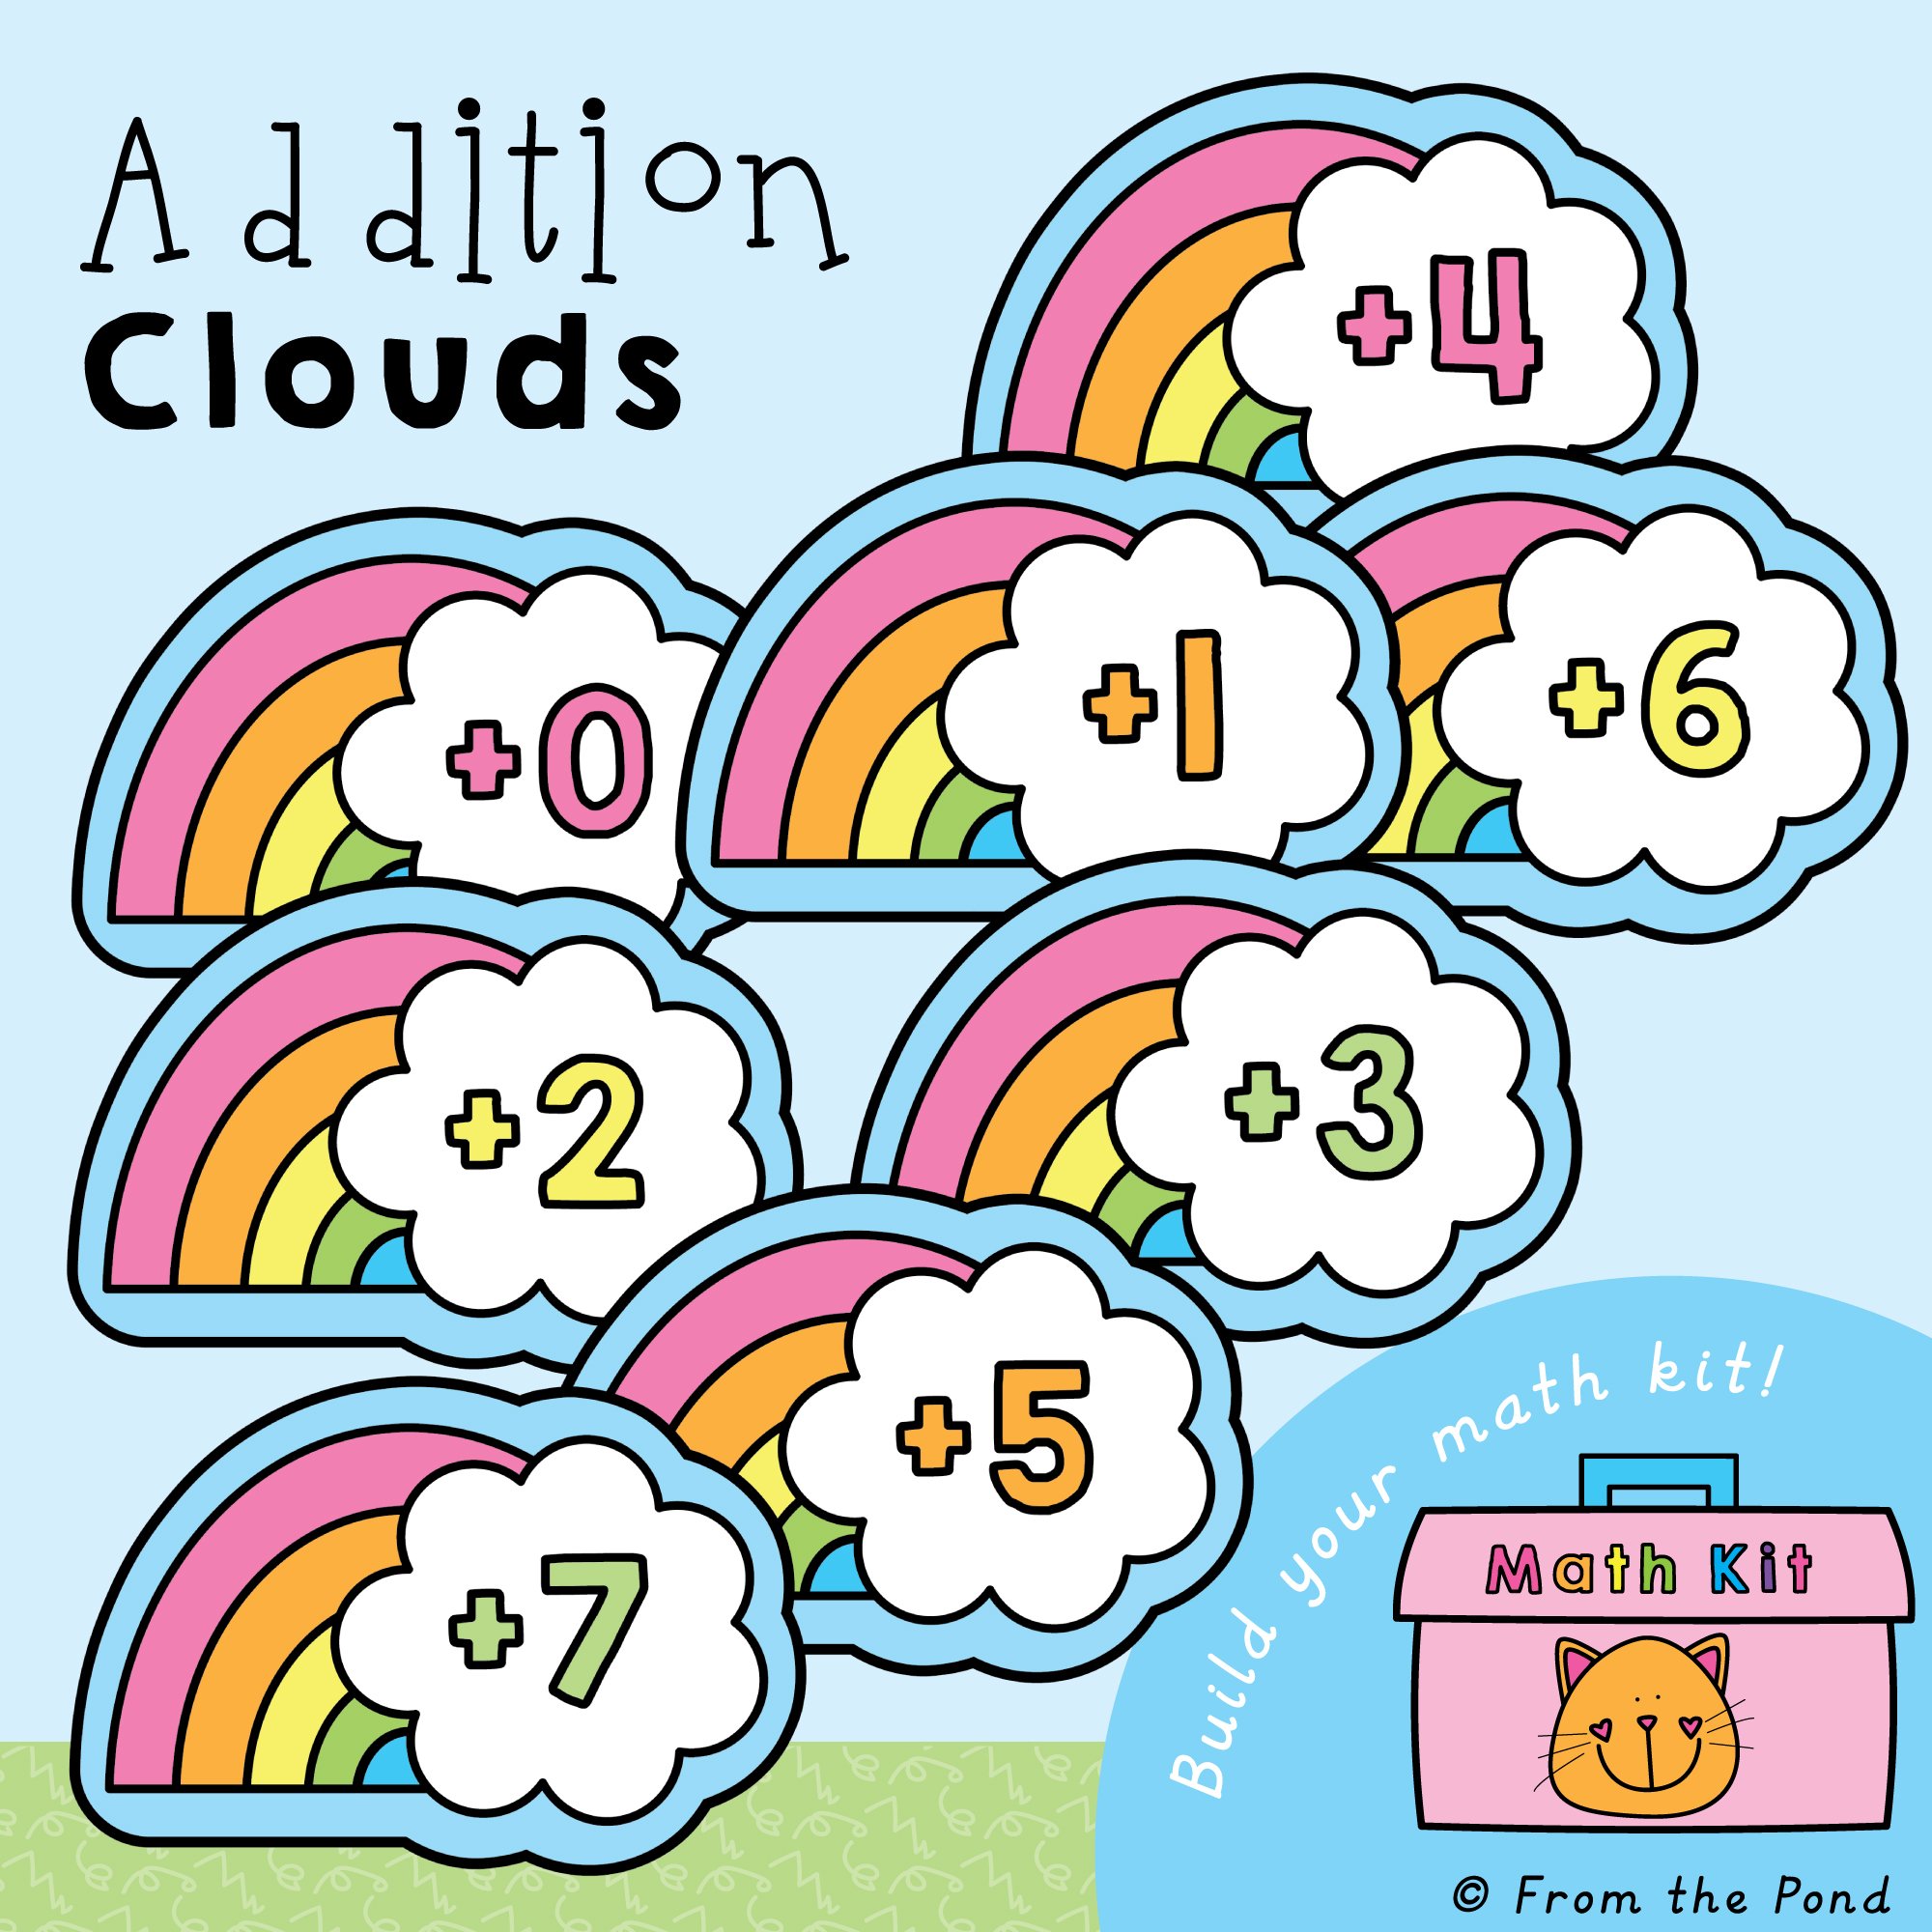 addition-clouds-pic-01.jpg